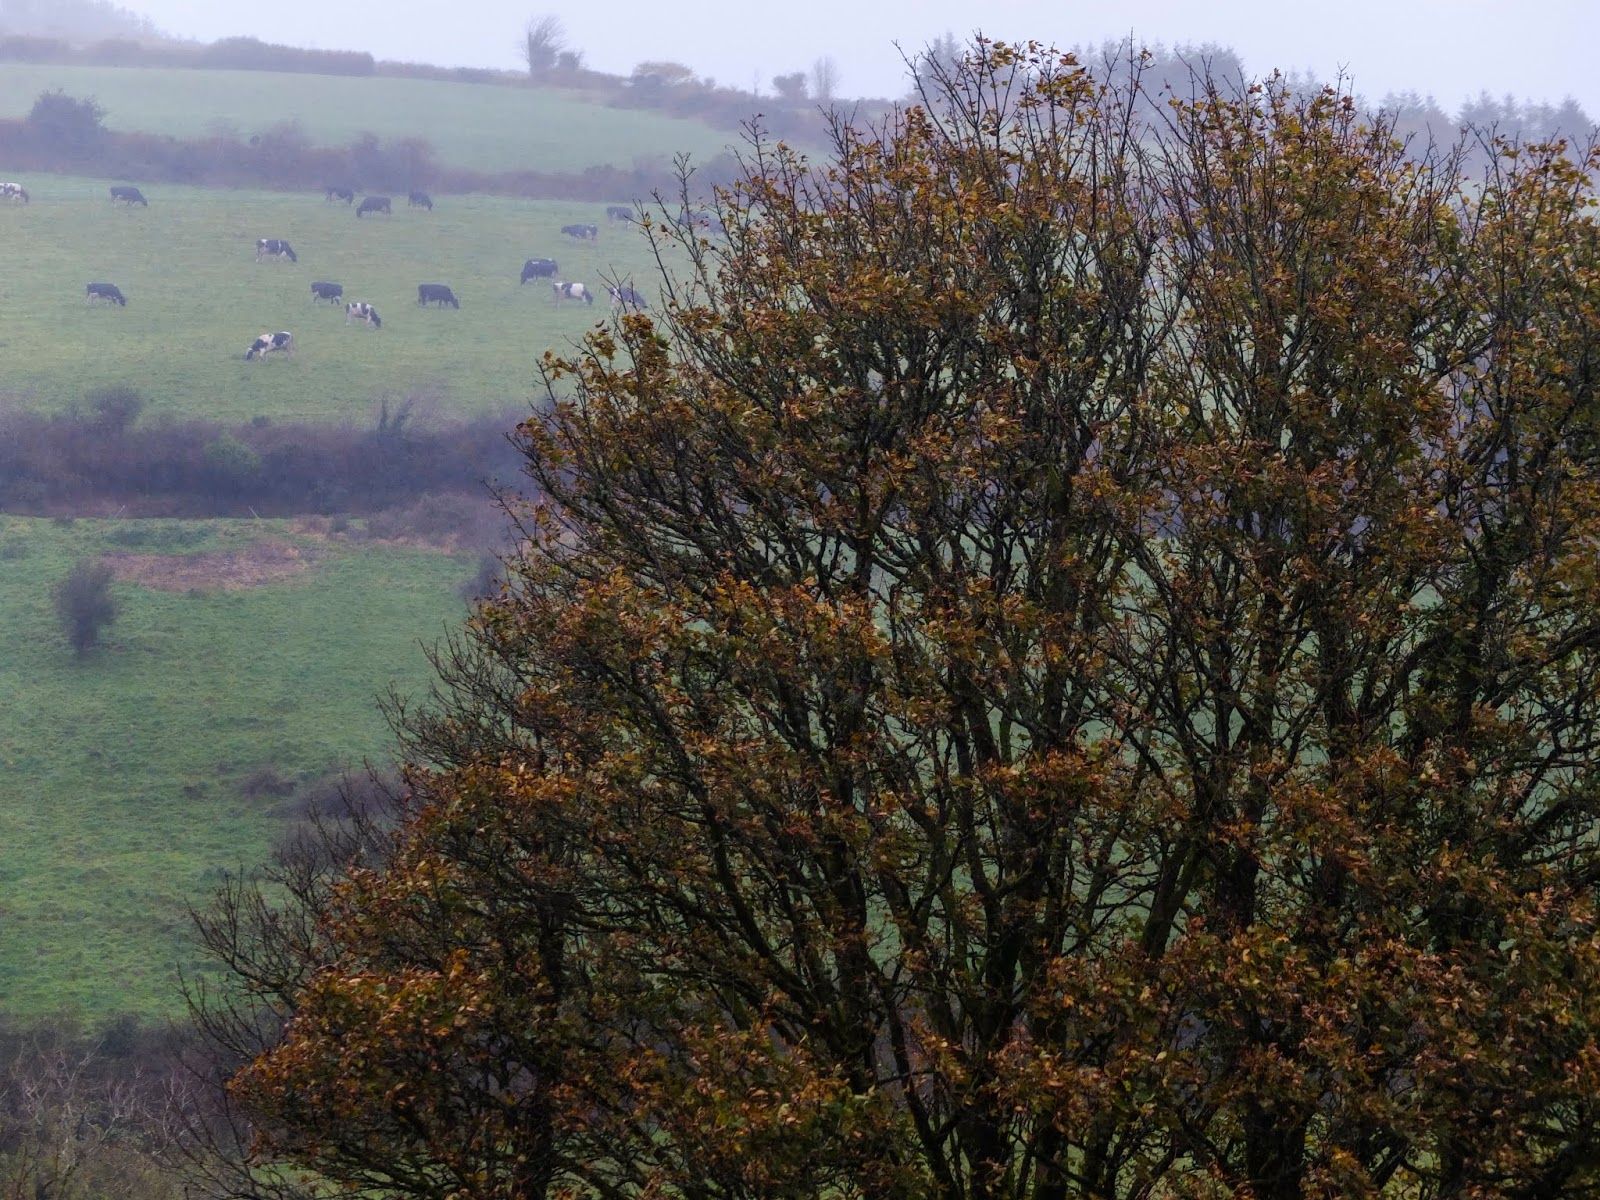 Brown leaves on a Maple tree in fog in a valley in North Cork.